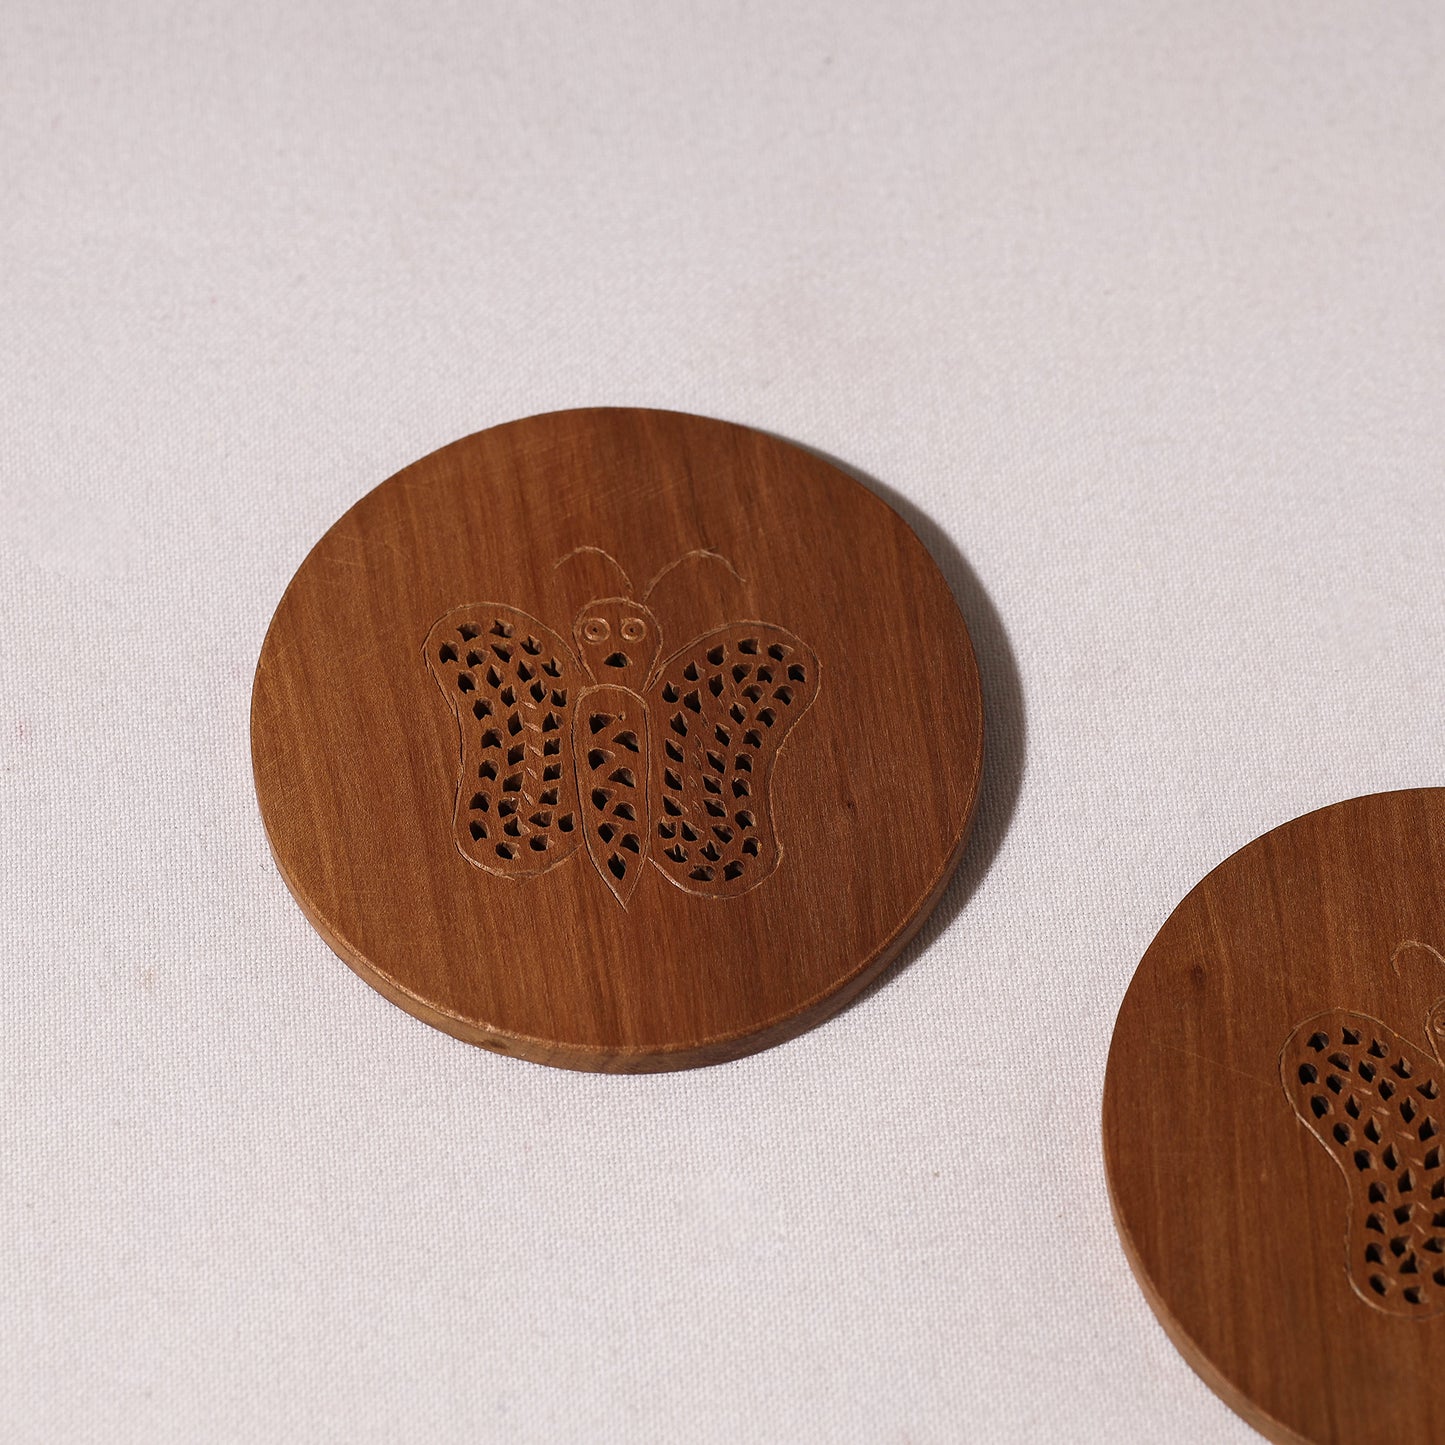 Hand Carved Loquat Wood Coasters (Set of 2)